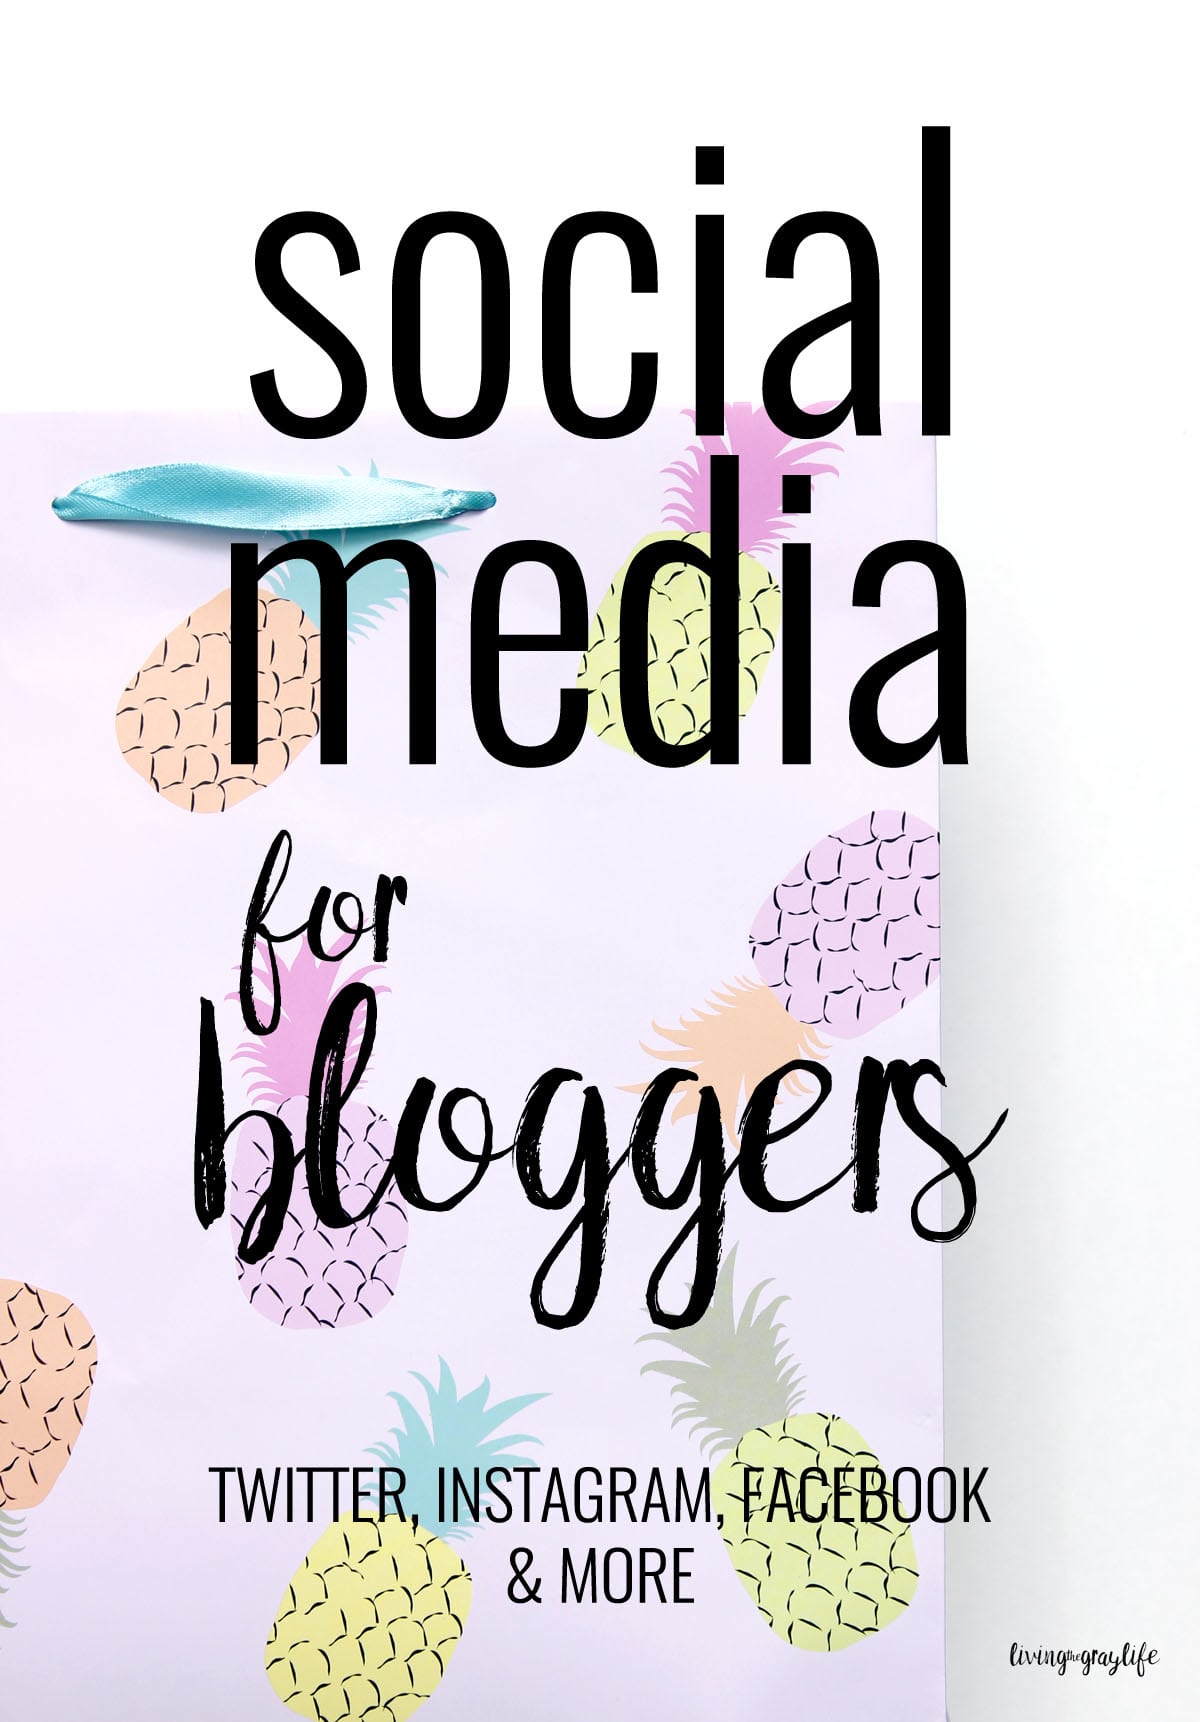 Social media for bloggers: Struggling to grasp social media as a blogger? Follow these simple tips to help grow your social platforms!